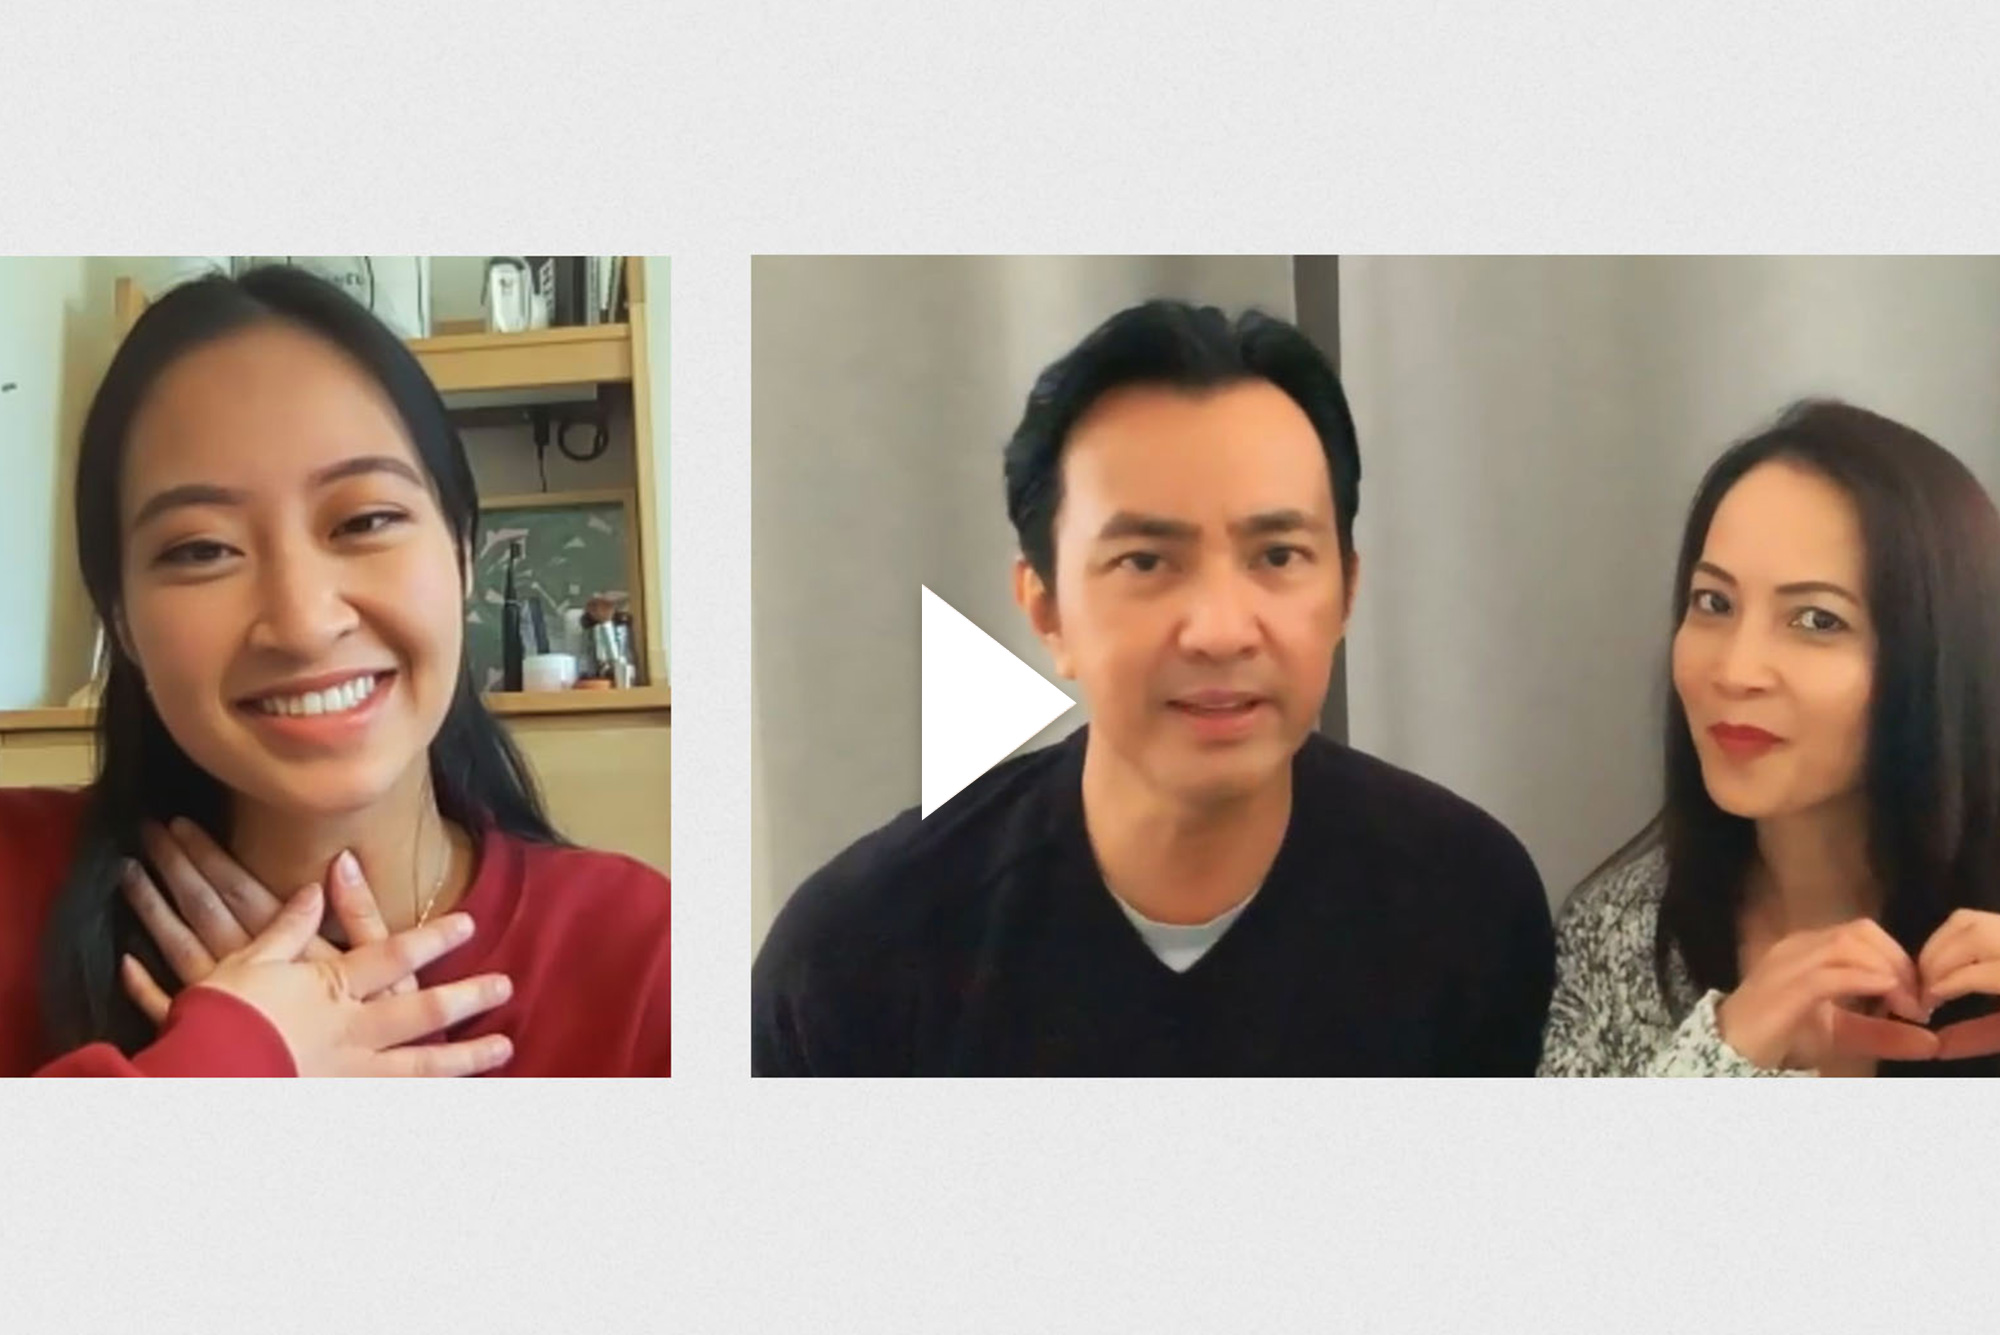 Screenshots of Chloe Torres (Questrom'21) and her parents in California, taken as Chloe watches the video sent in by her parents. Chloe brings her hands to her chest and smiles, and her mom makes a shape of a heart with her hands. Video play button is overlaid.